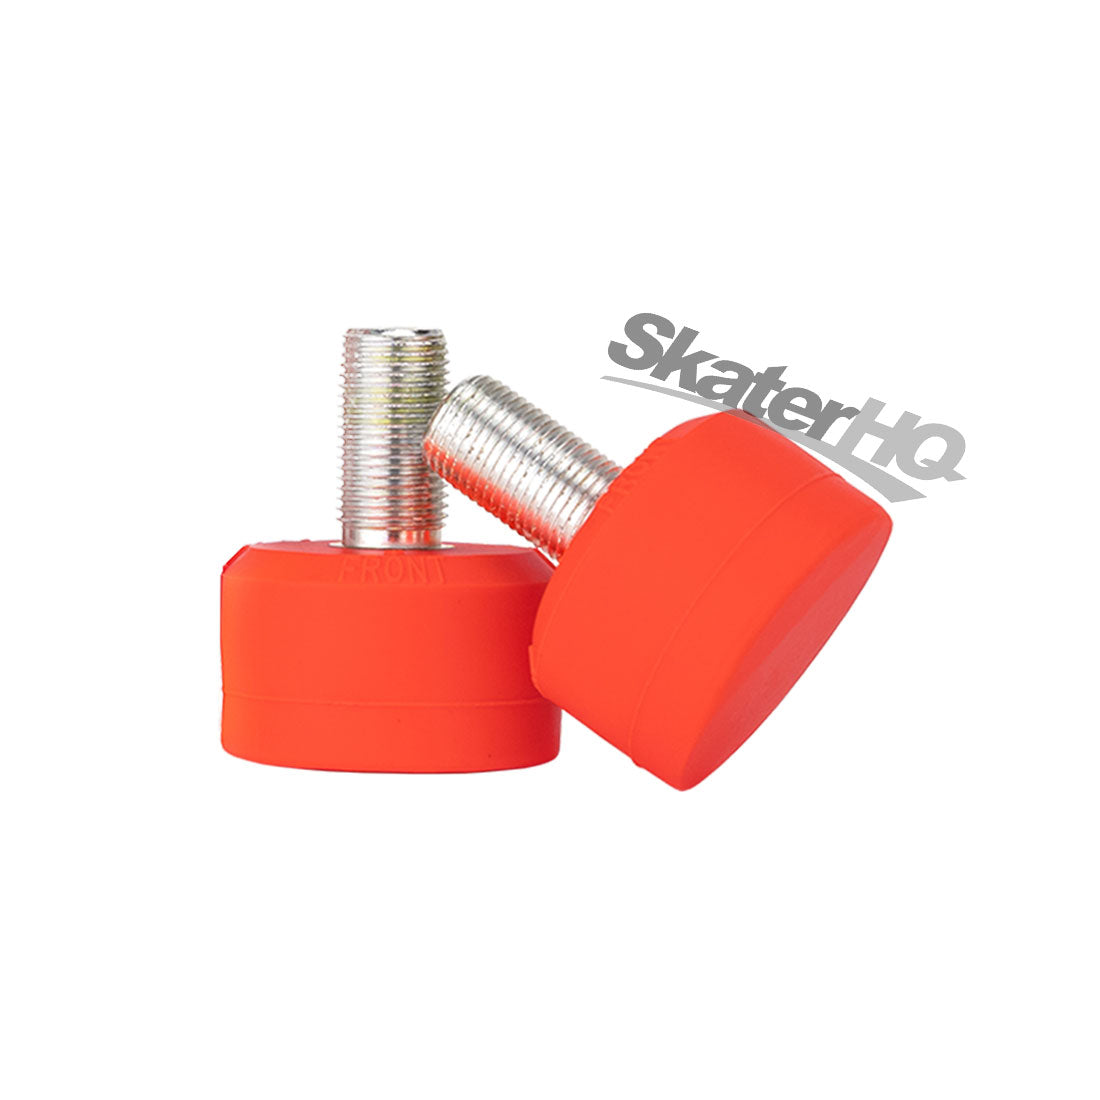 Gumball Toe Stops - Long/Standard - Watermelon 83A Roller Skate Hardware and Parts